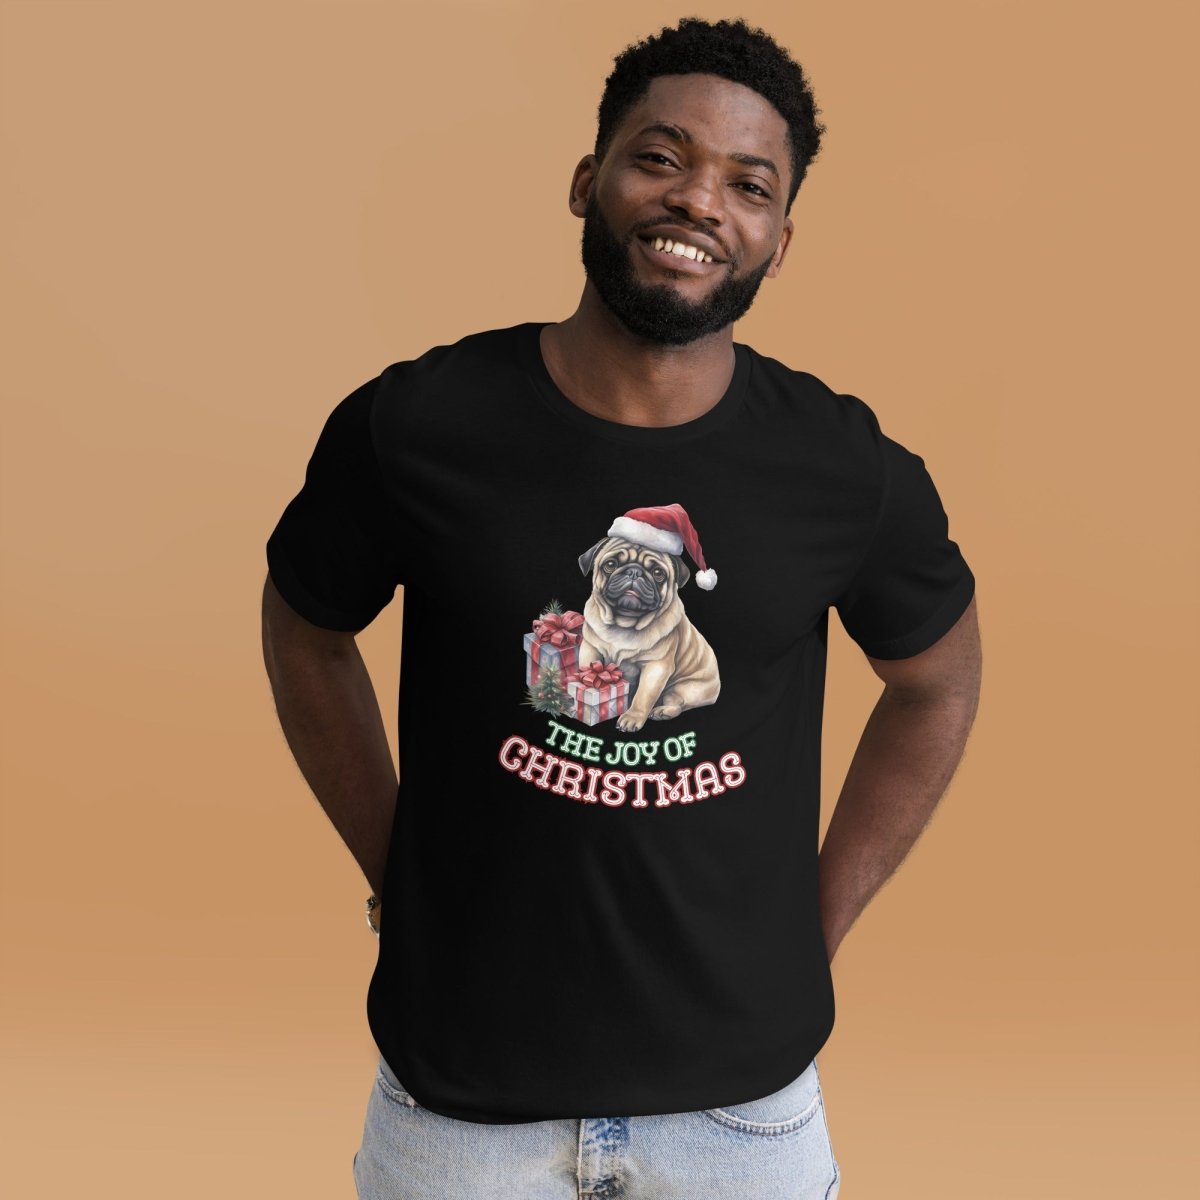 Christmas Pug T-Shirt - High Quality Festive Unisex T-Shirt, Gift for Her, Gift for Doglovers, Funny Xmas Shirt - Everything Pixel